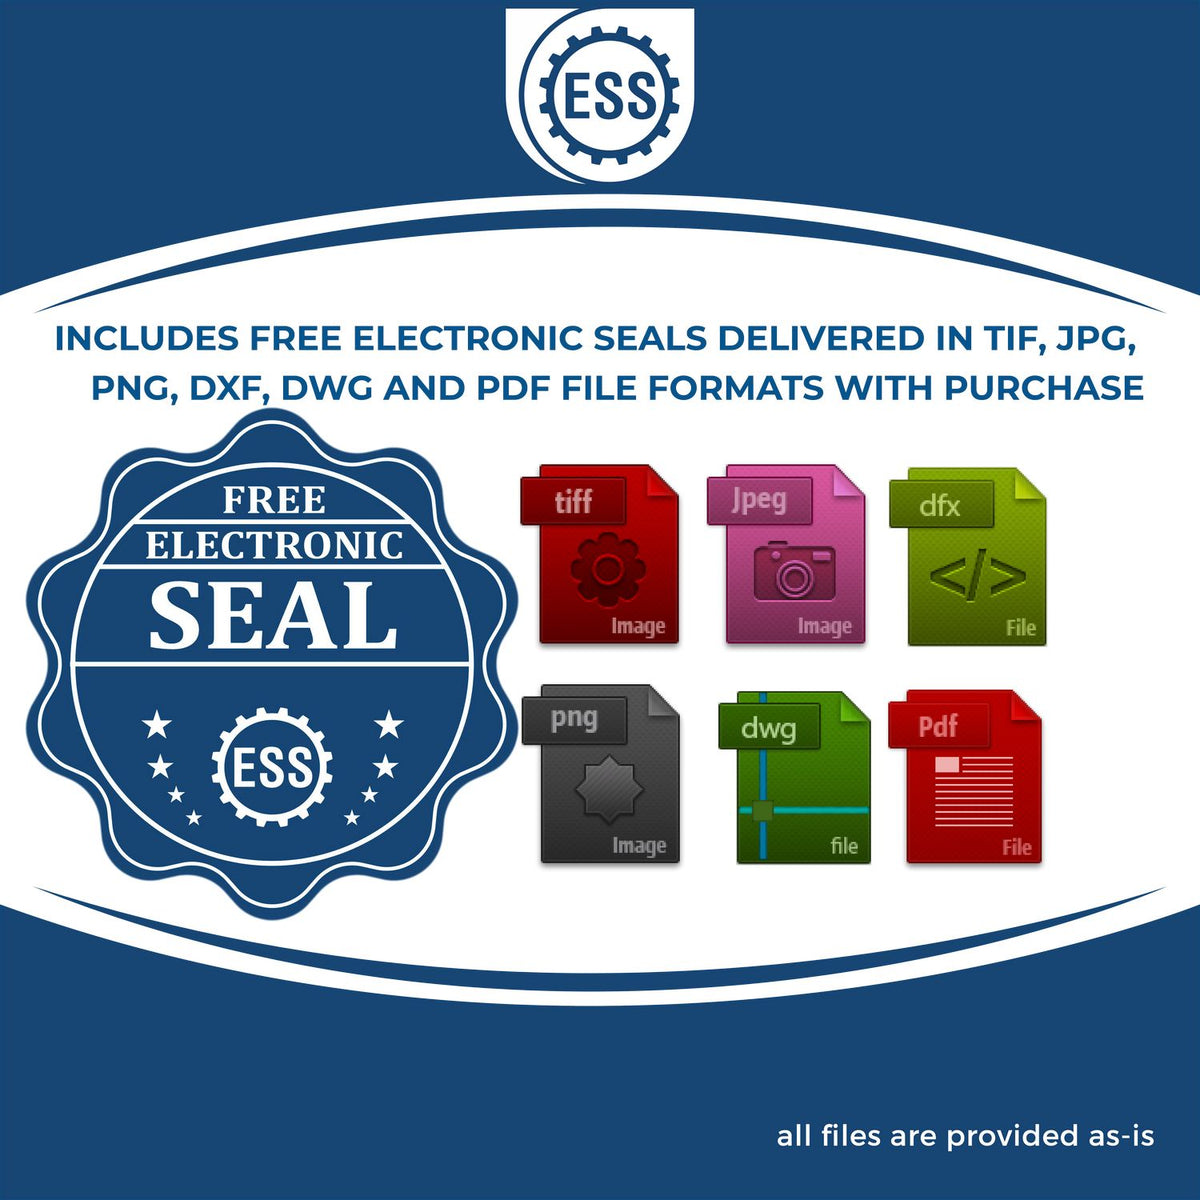 An infographic for the free electronic seal for the New York Desk Architect Embossing Seal illustrating the different file type icons such as DXF, DWG, TIF, JPG and PNG.